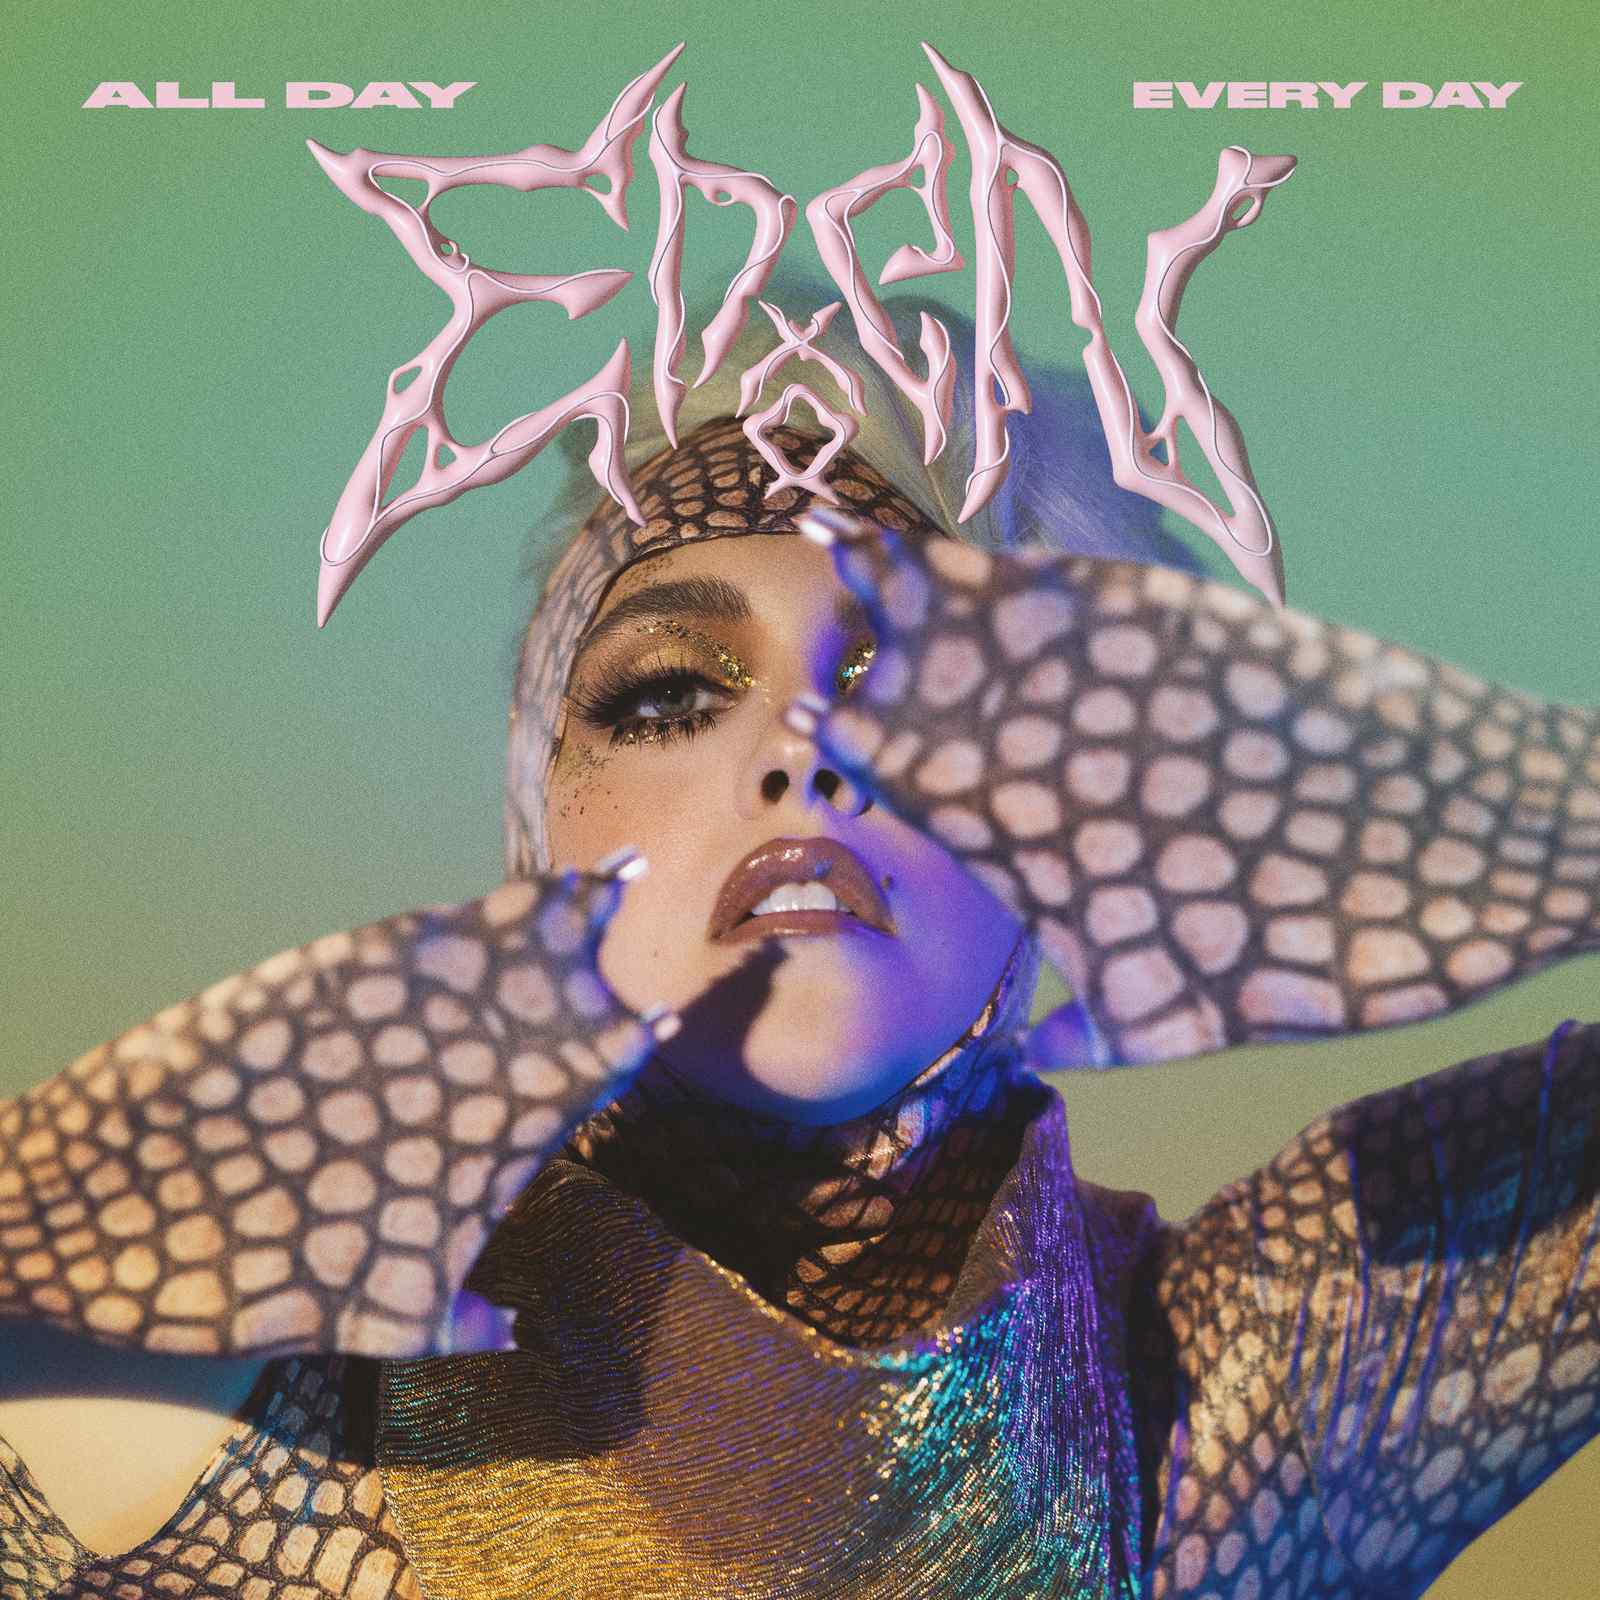 New Single - "All Day Every Day"